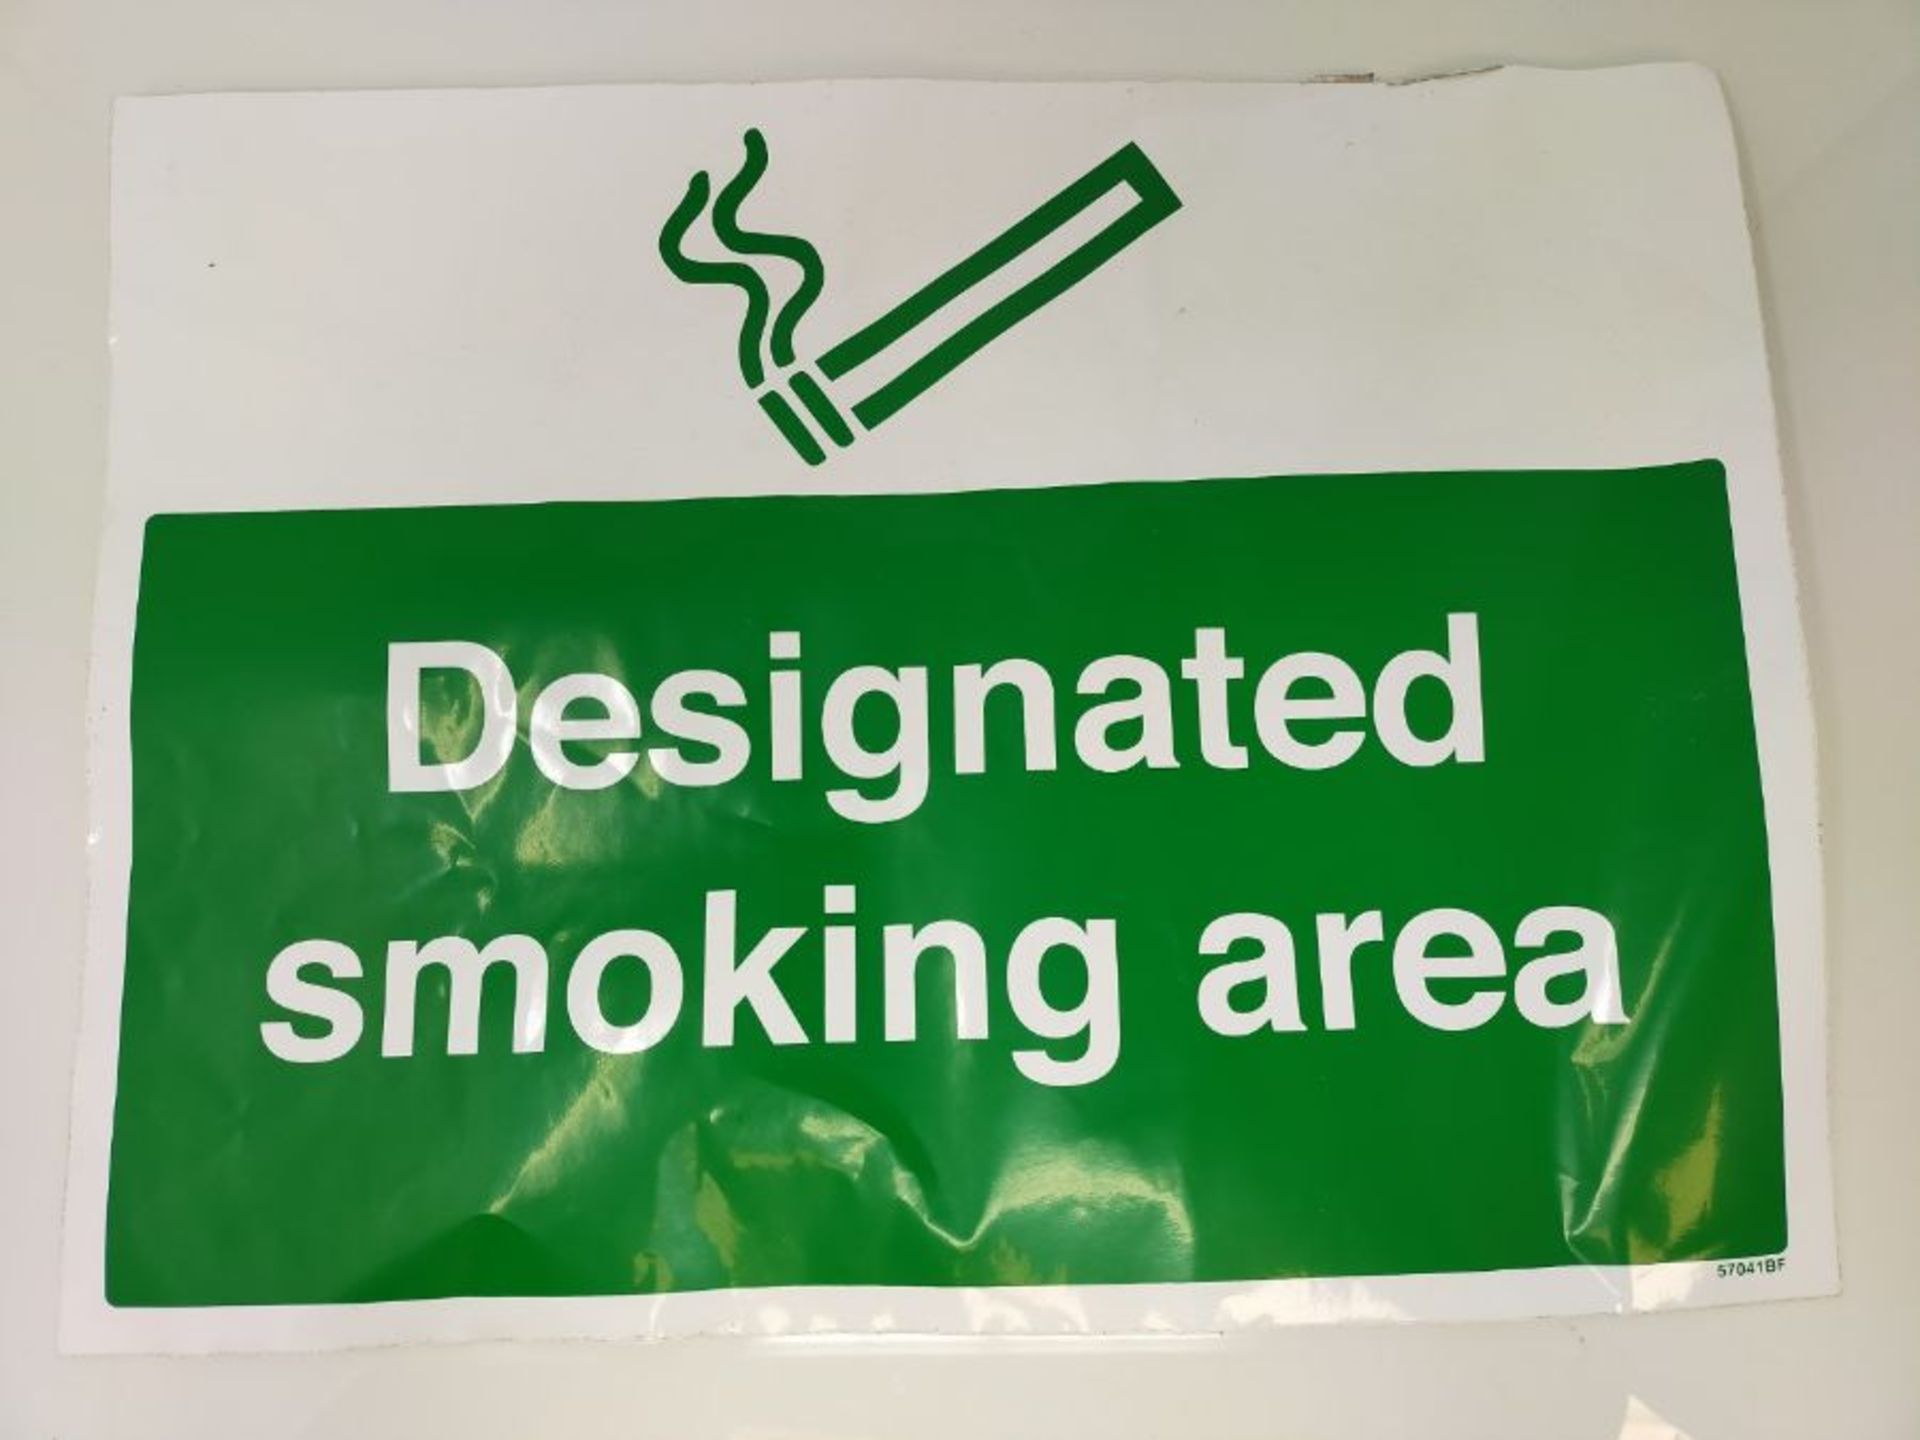 VSafety Designated Smoking Area Prohibition Sign - Landscape - 400mm x 300mm - Self Ad - Image 2 of 2